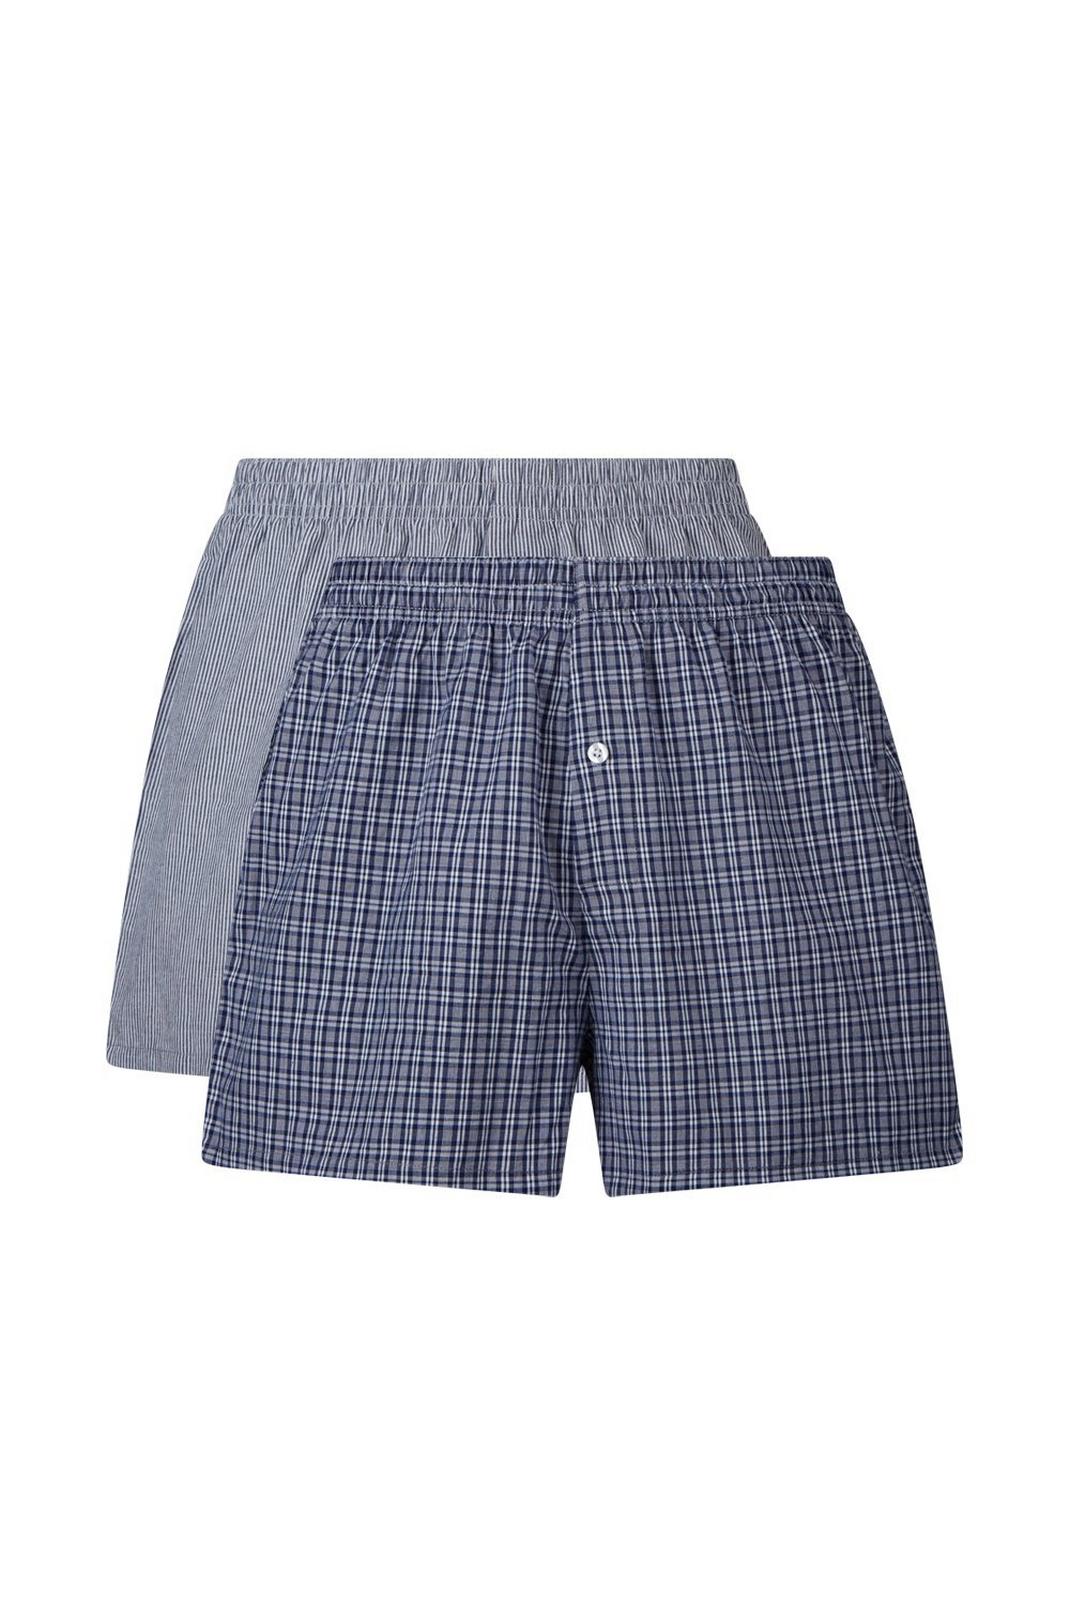 2 Pack Woven Navy Design Boxers  image number 1